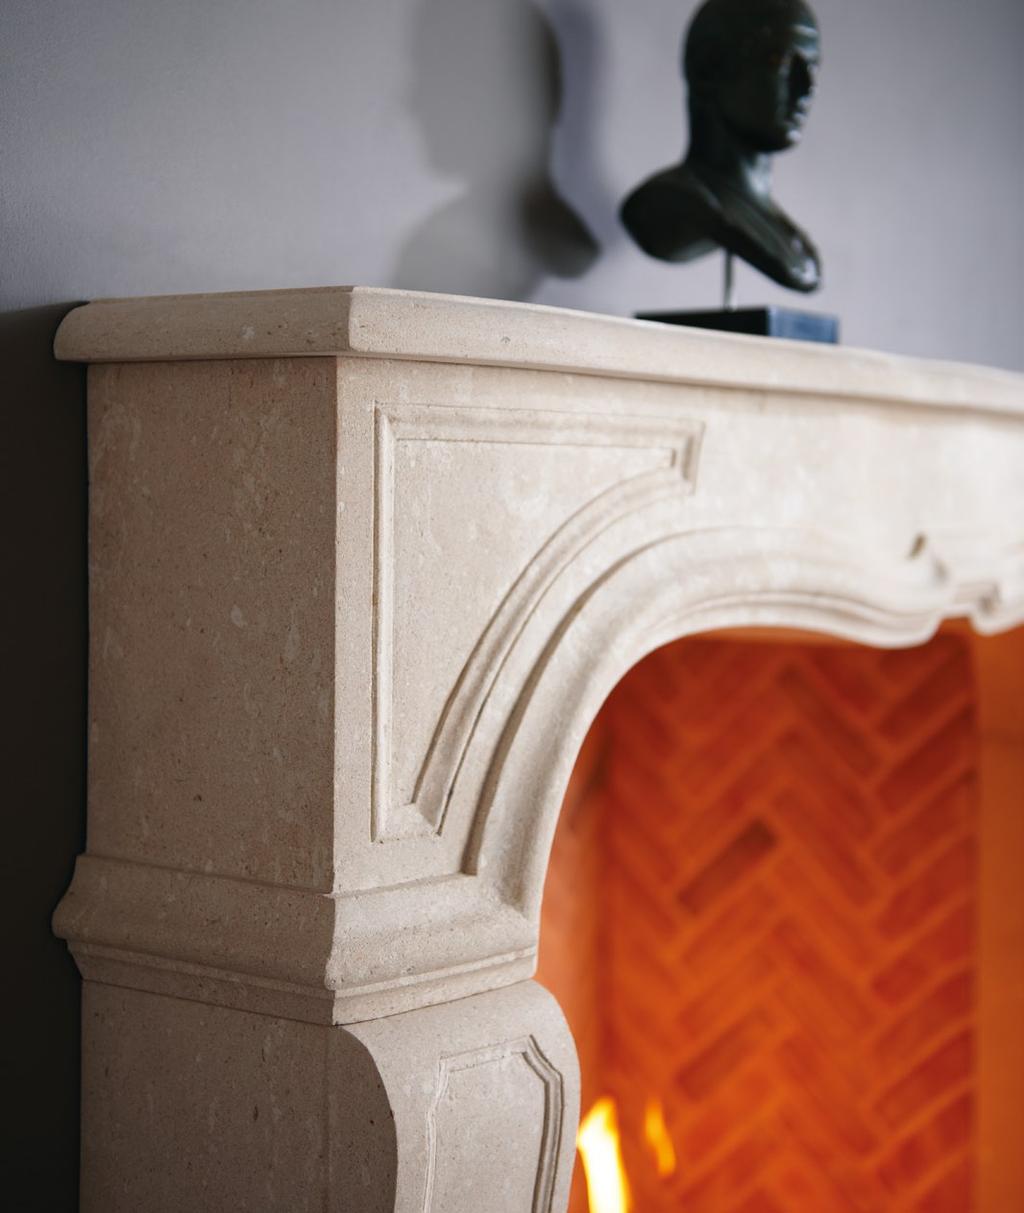 A Chesney s fireplace is created by master craftsmen using the finest natural materials. Chesney s use only the finest natural materials to make their fireplaces.